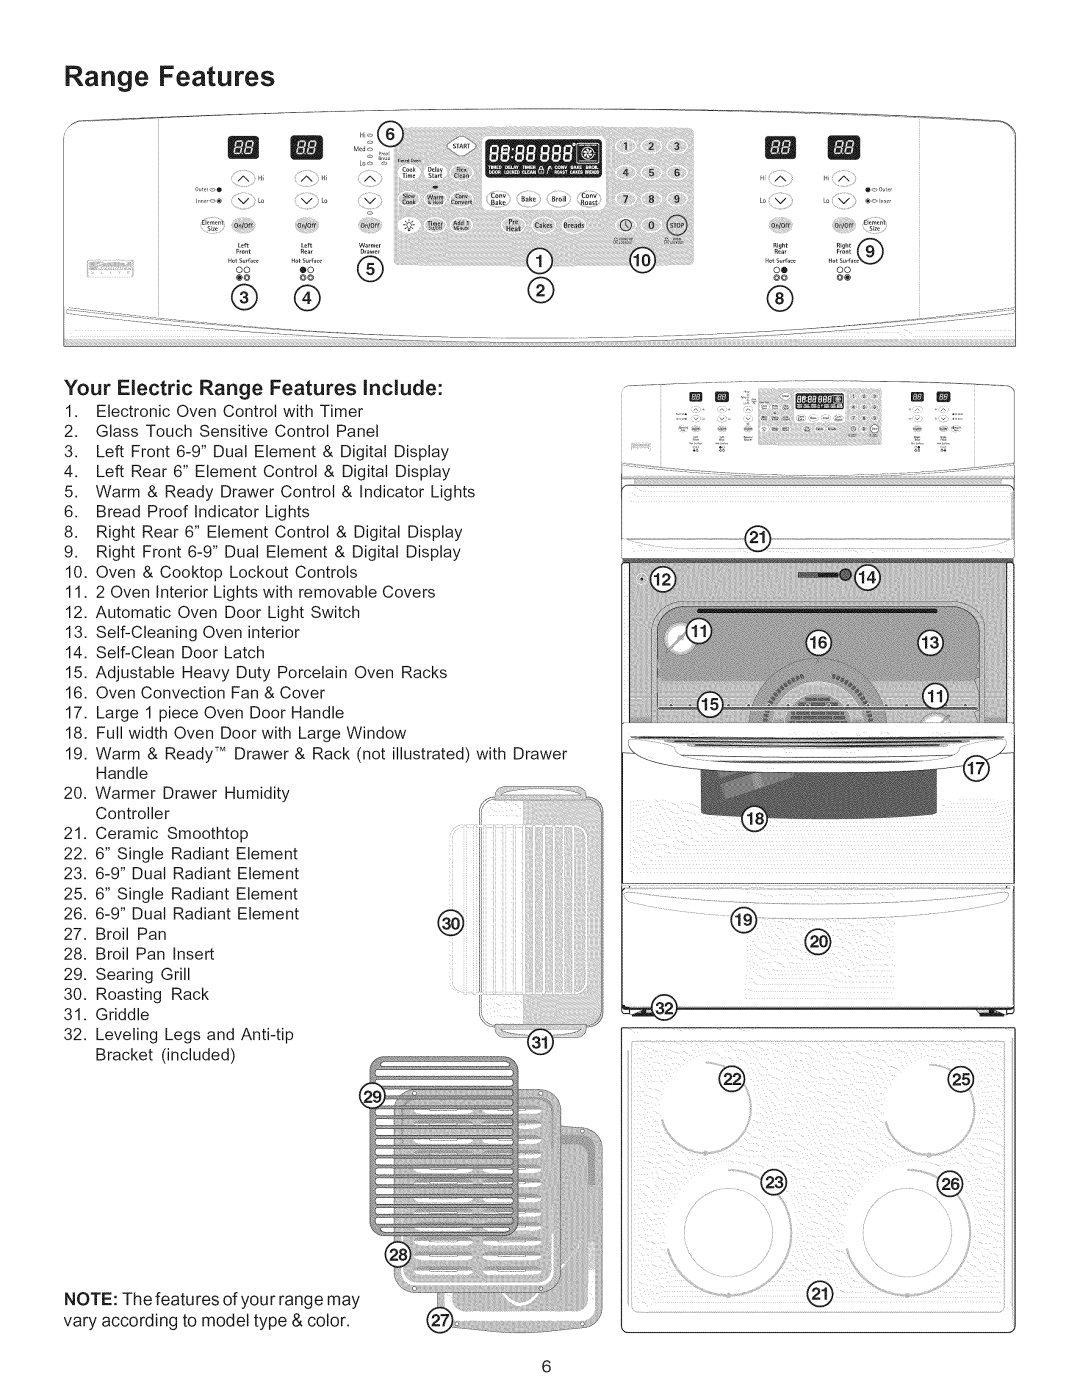 Kenmore 790.9662 manual Your Electric Range Features include 